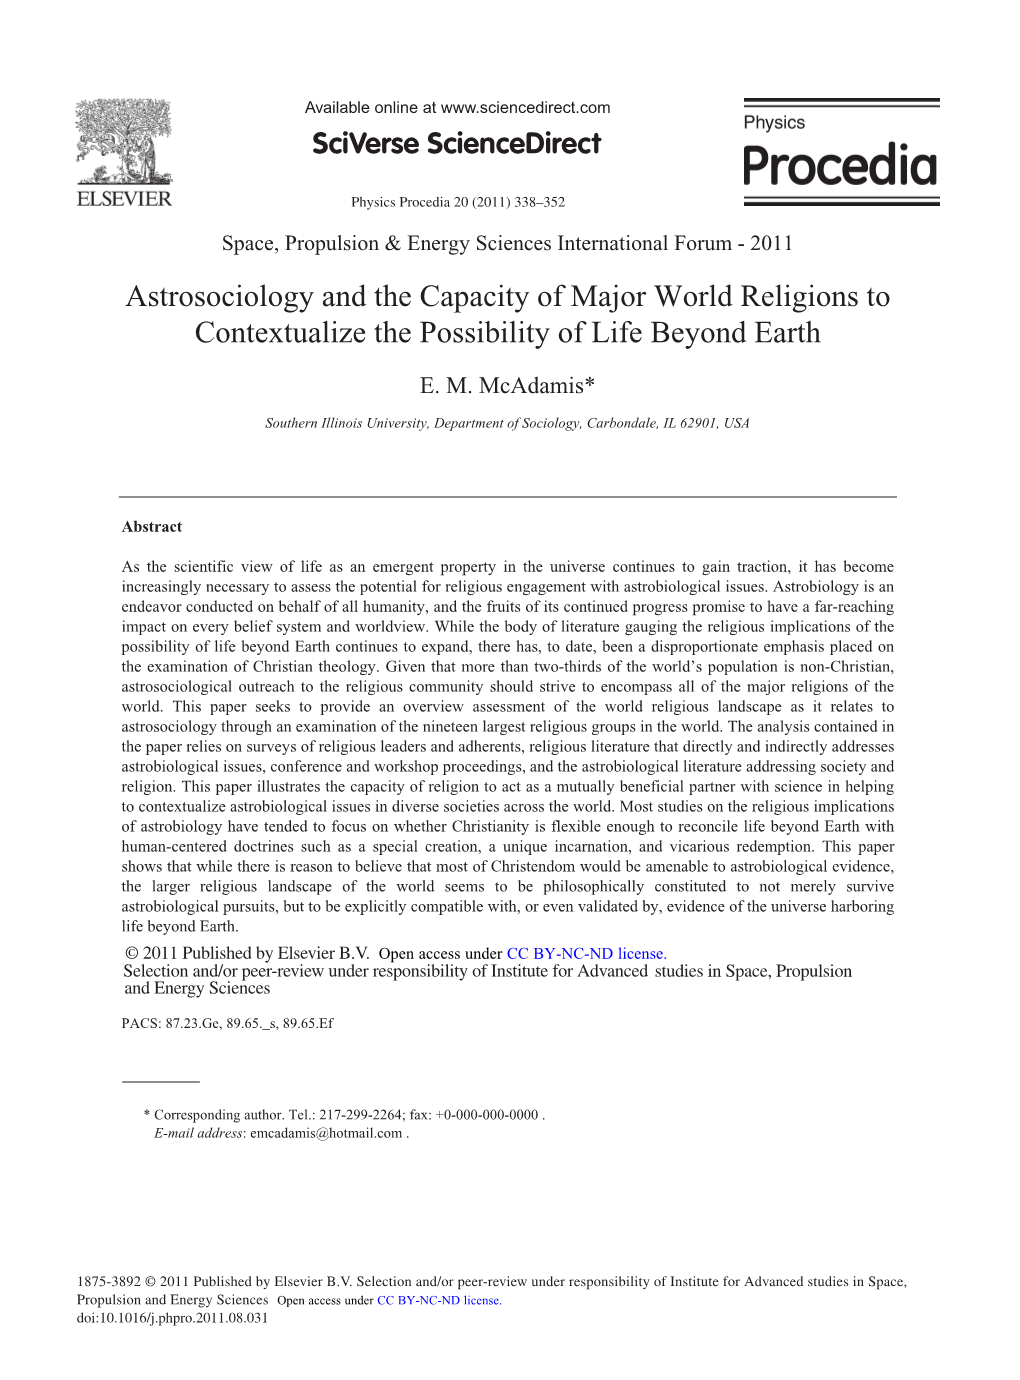 Astrosociology and the Capacity of Major World Religions to Contextualize the Possibility of Life Beyond Earth